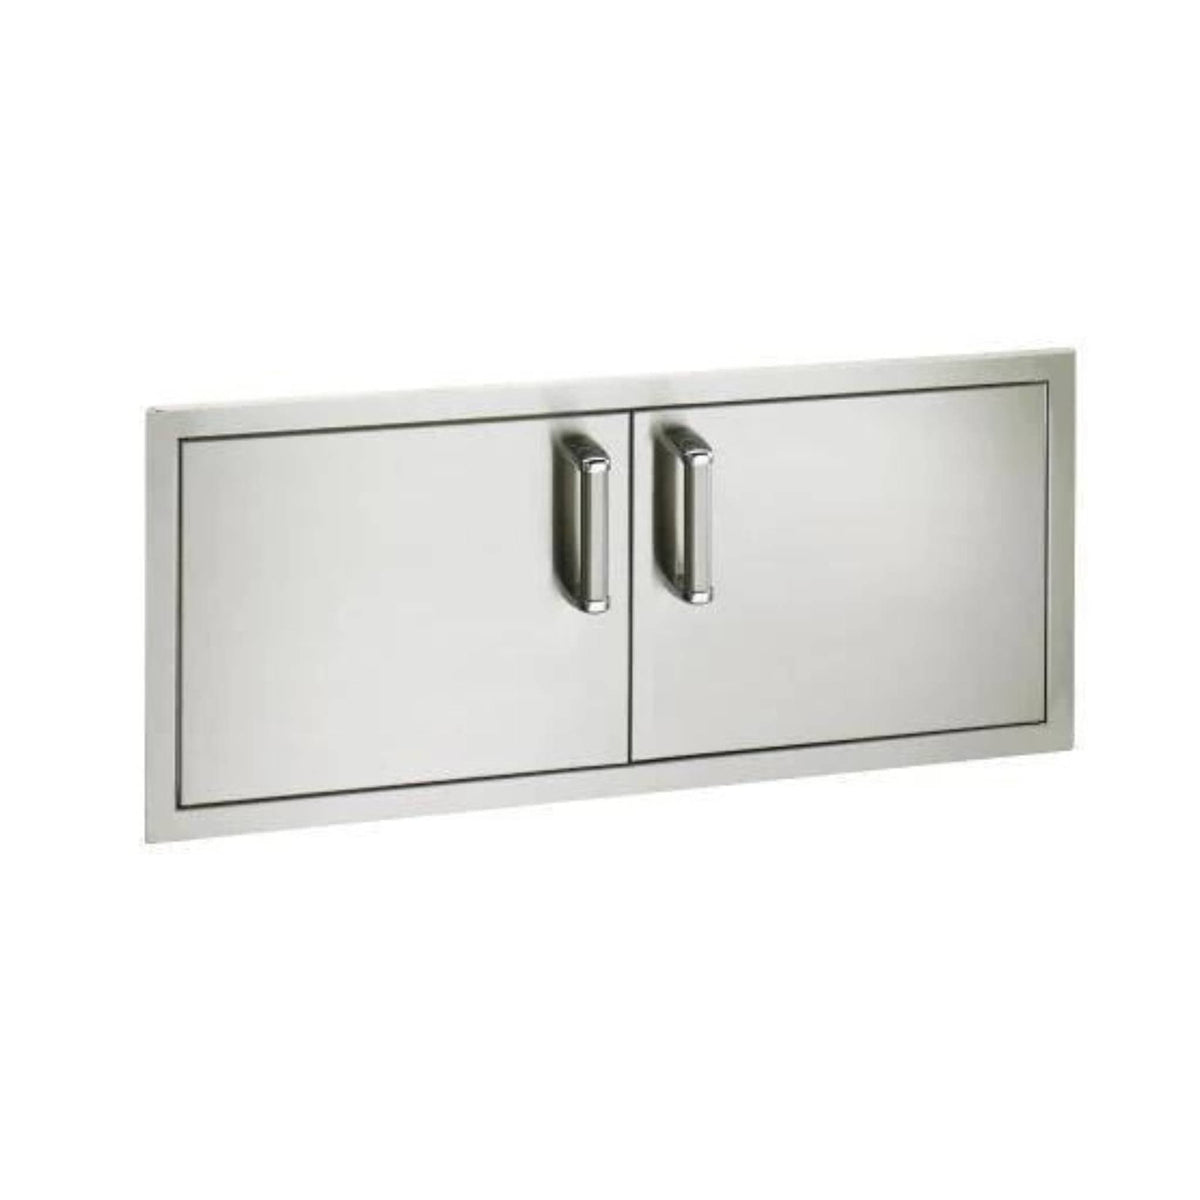 Fire Magic Double Access Doors (Reduced Height) 53938SC